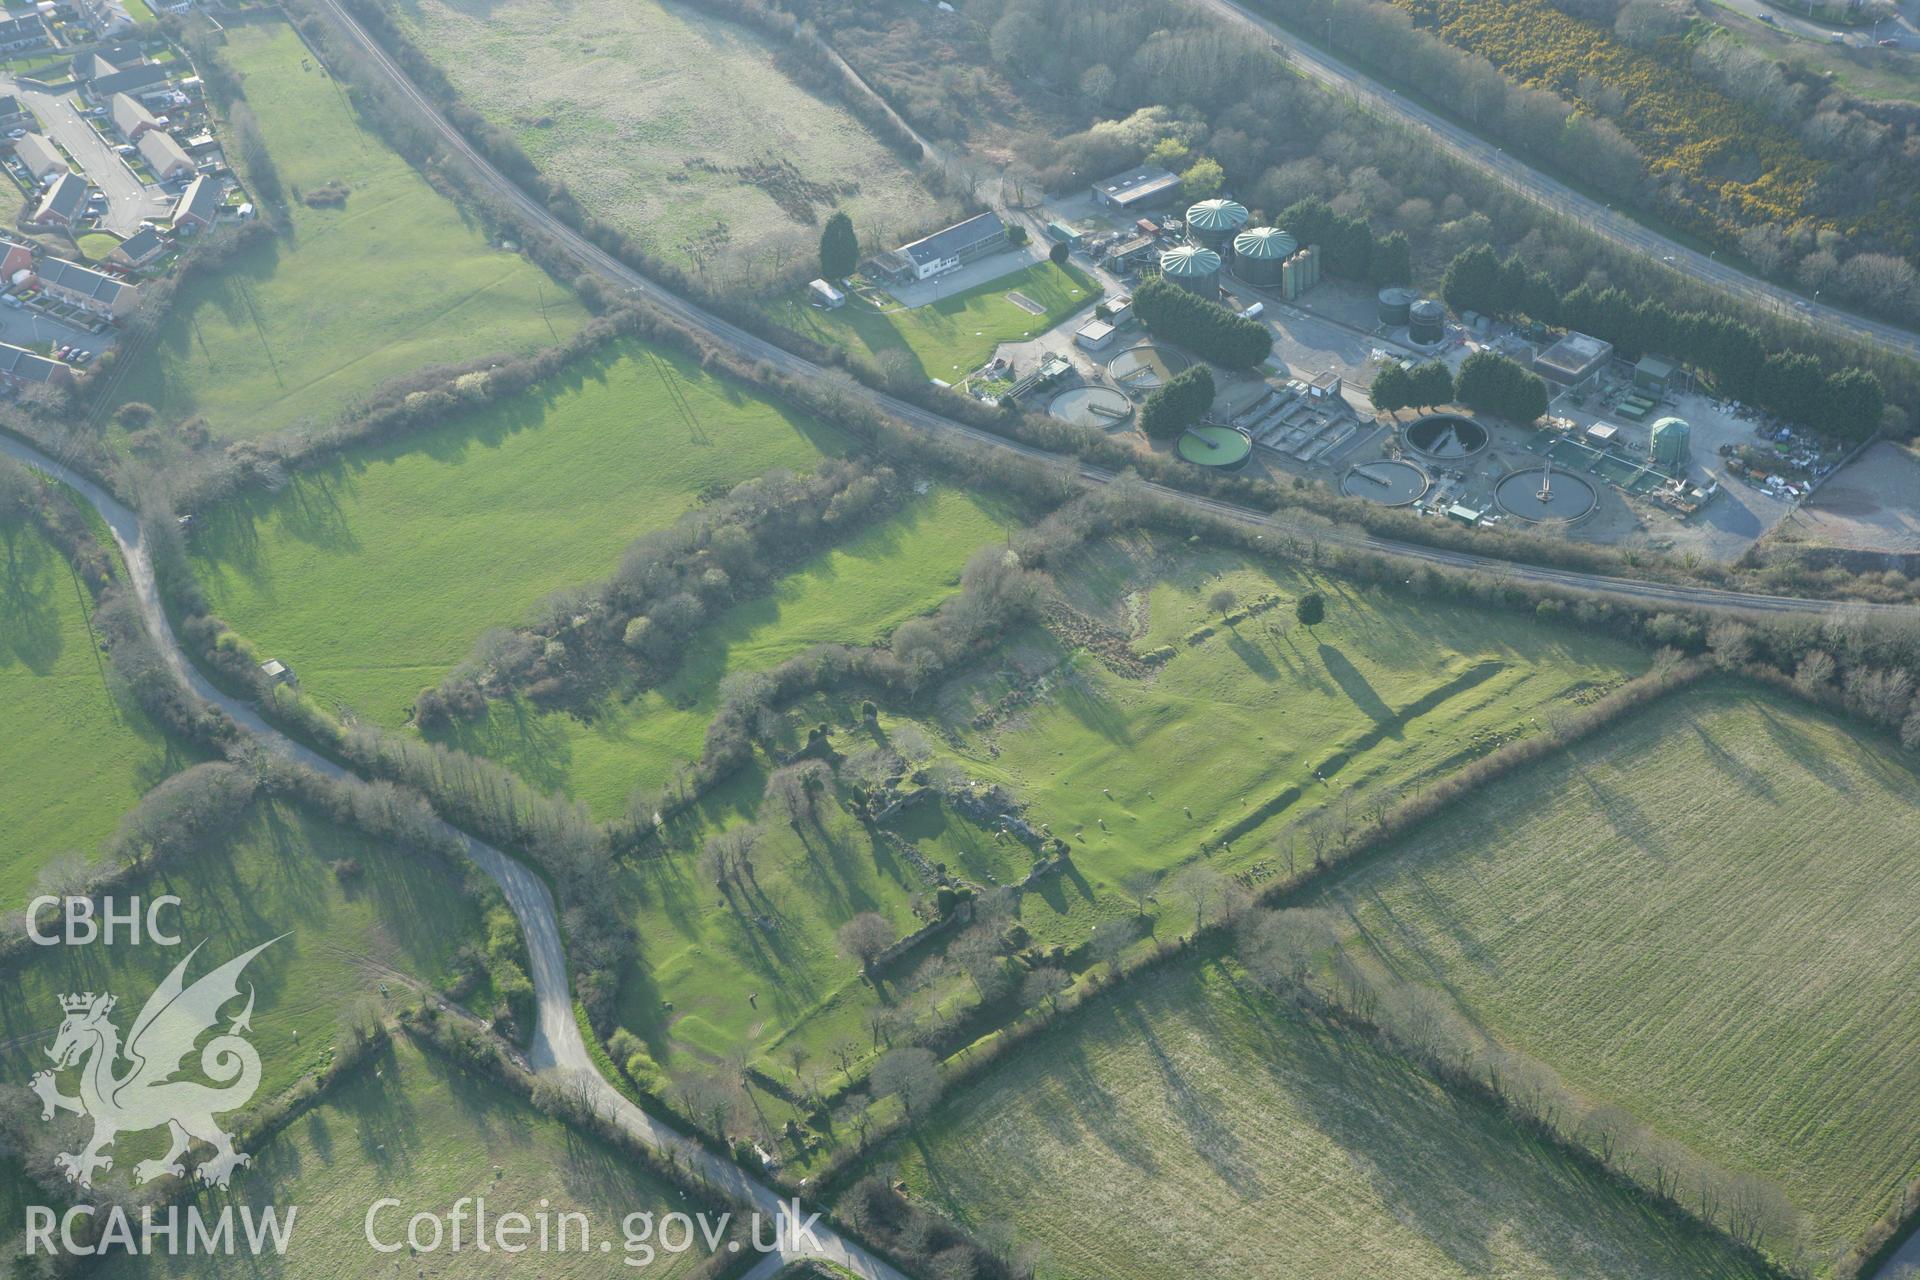 RCAHMW colour oblique aerial photograph of Haroldston House Garden Earthworks, Haverfordwest. Taken on 13 April 2010 by Toby Driver